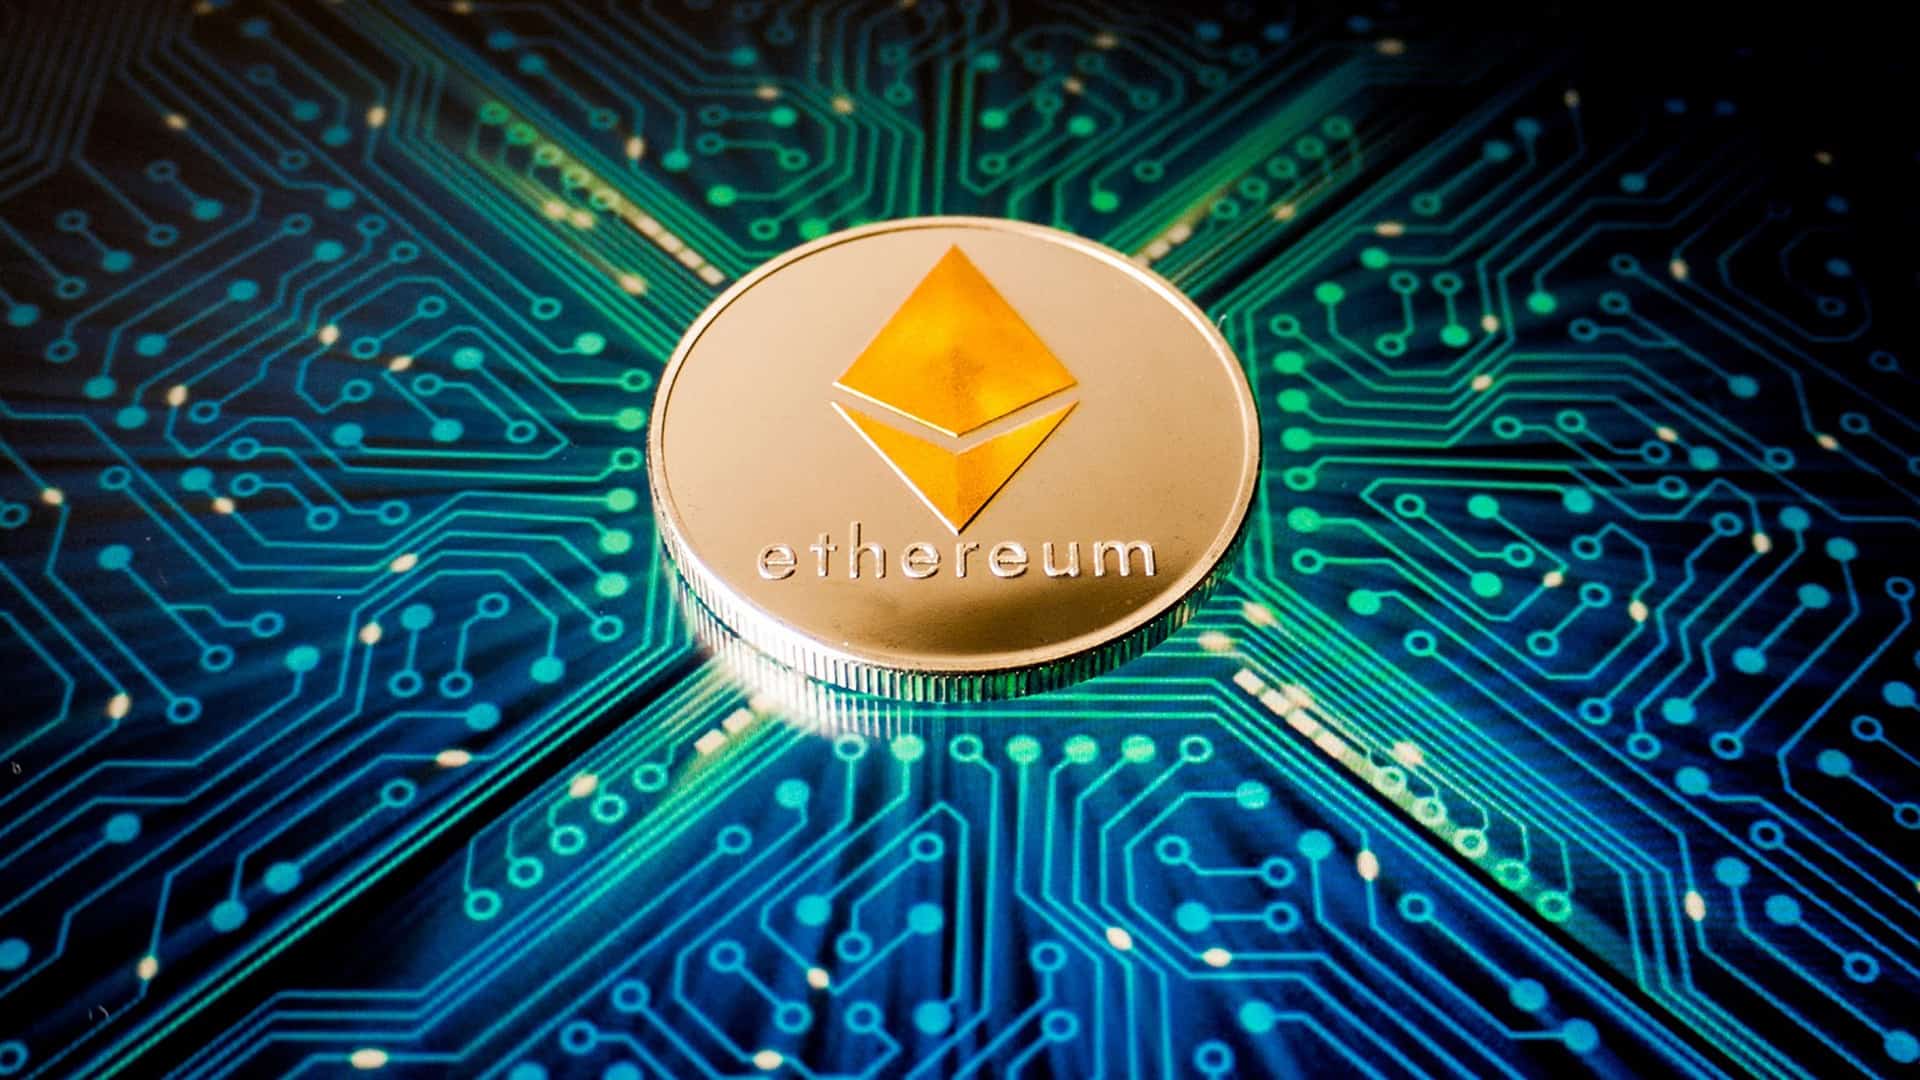 ethereum cyberpiracy The Ethereum network has finally transitioned to the proof-of-stake consensus algorithm as of 2:45 AM EST. The moment has finally arrived as “The Merge,” after years of delays, is finally complete.